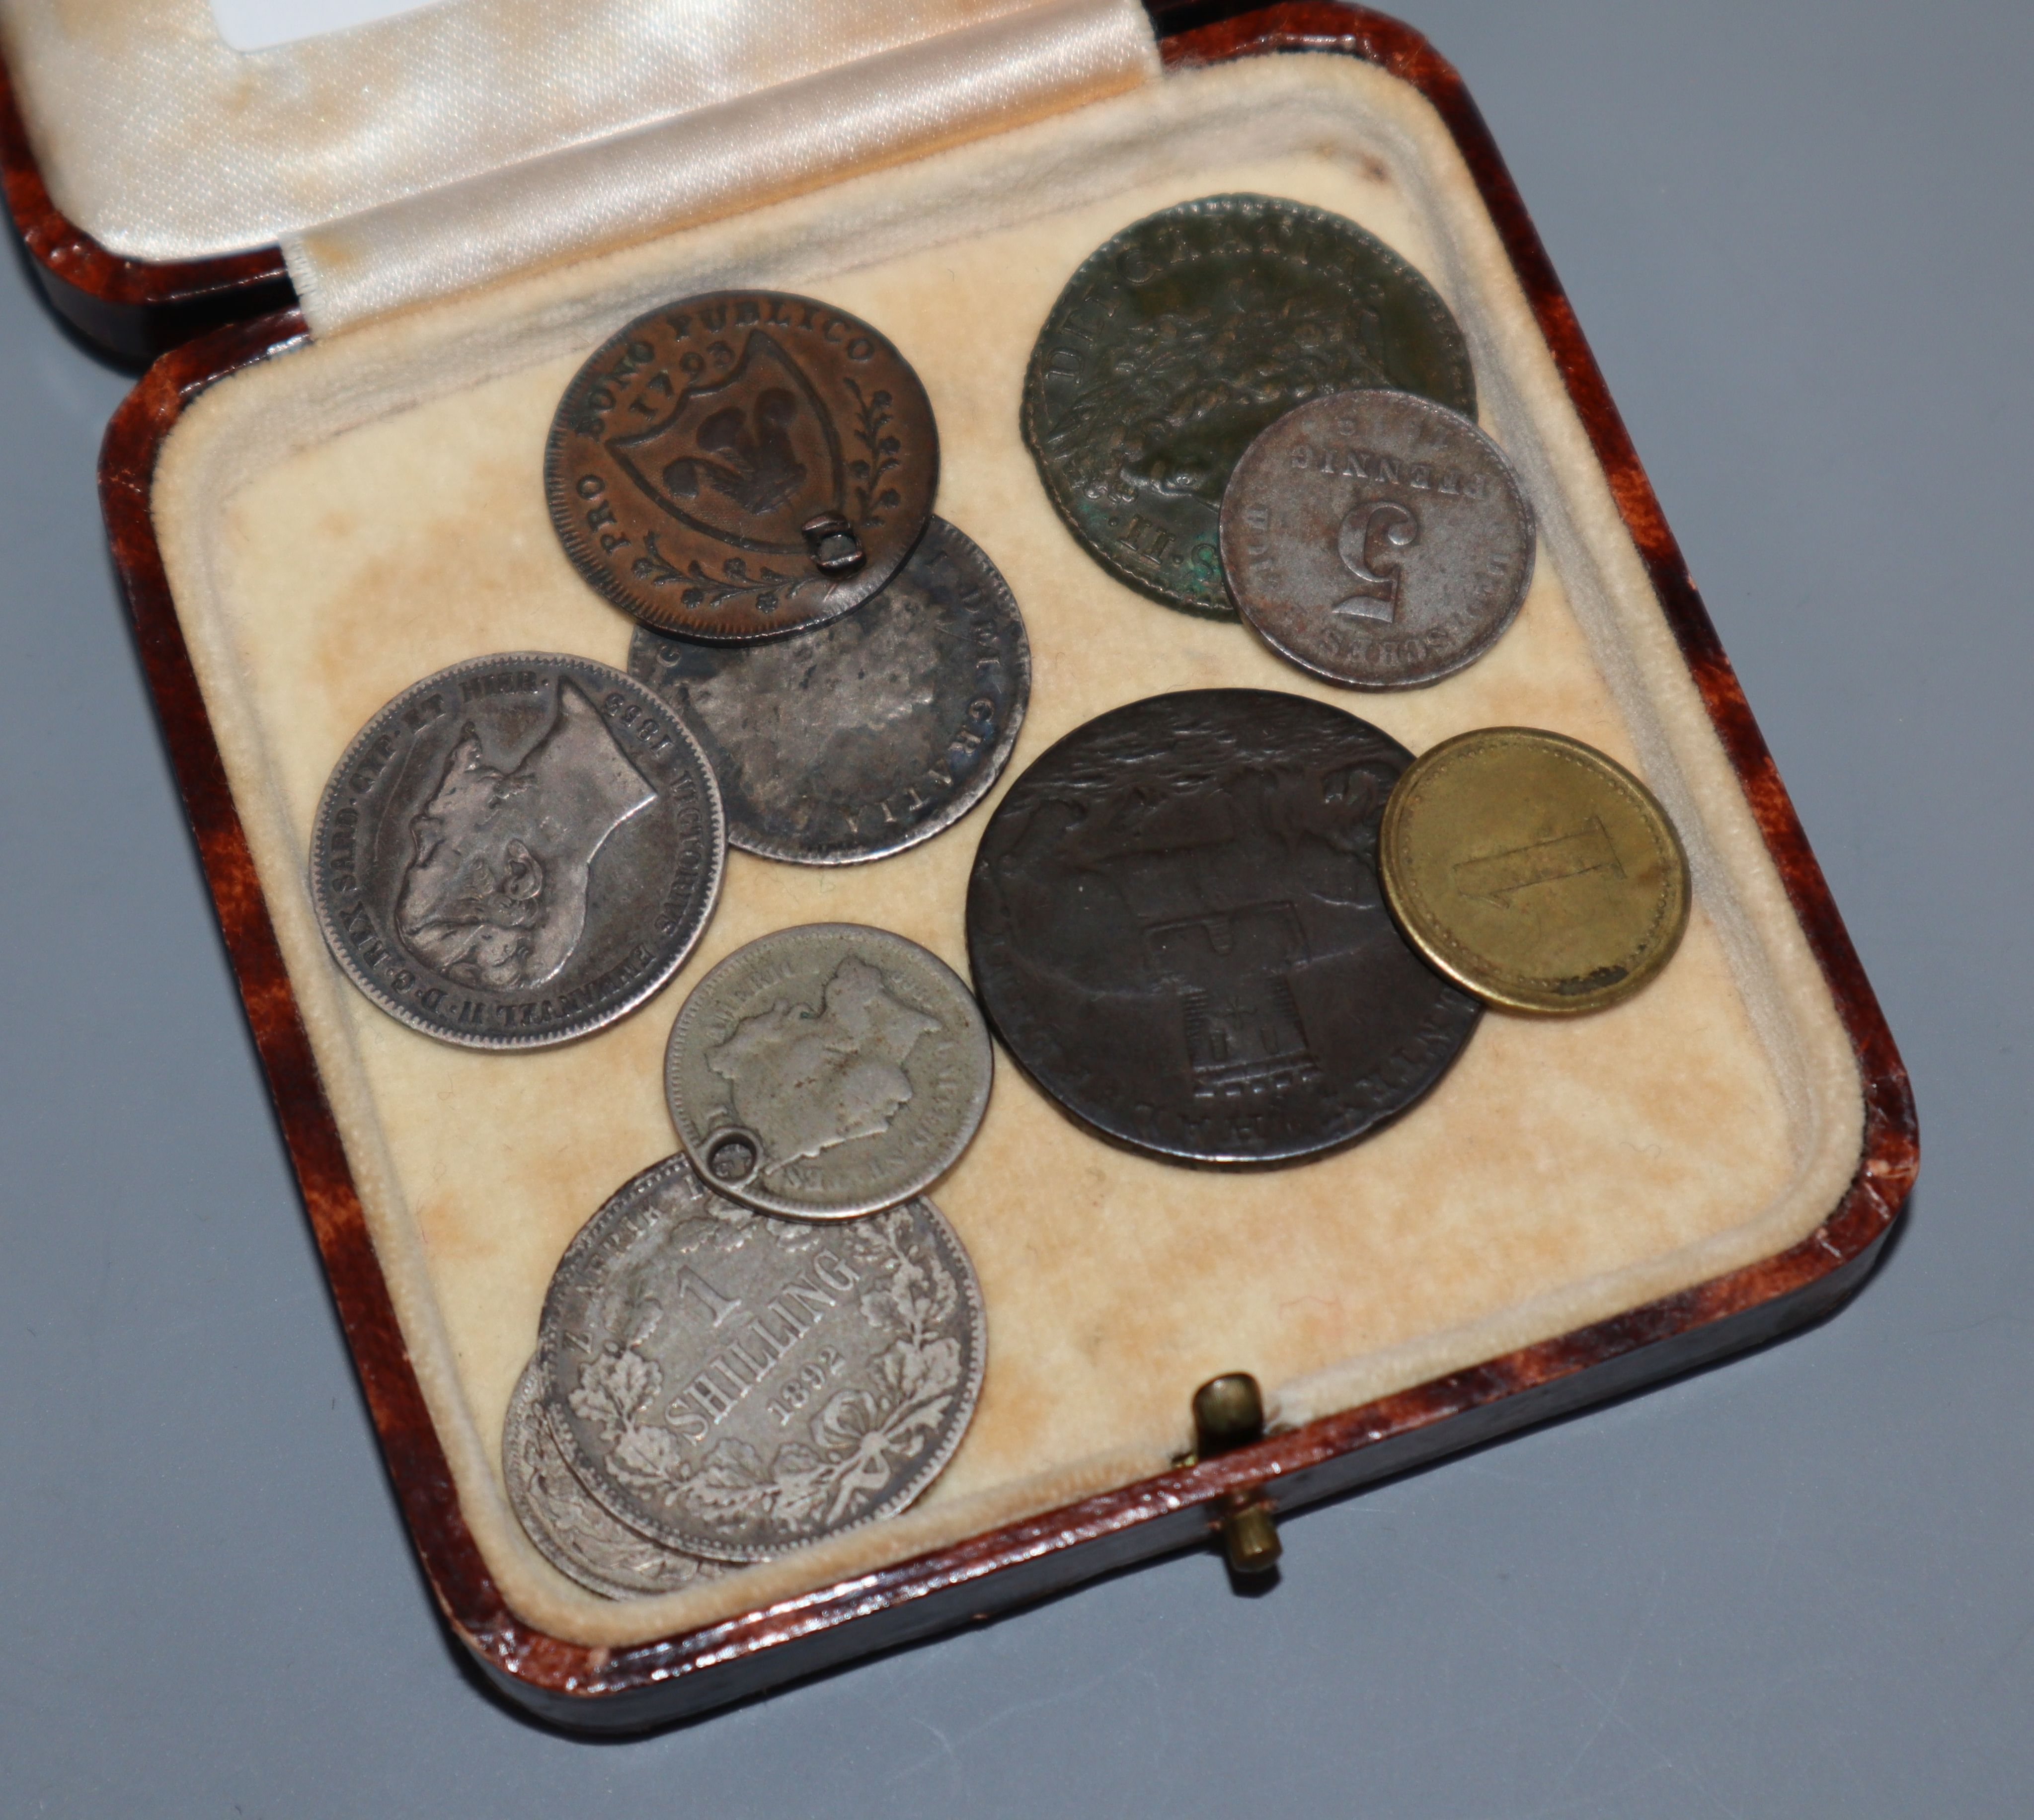 A James II dublin mint civil war money shilling 1689 and other coinage